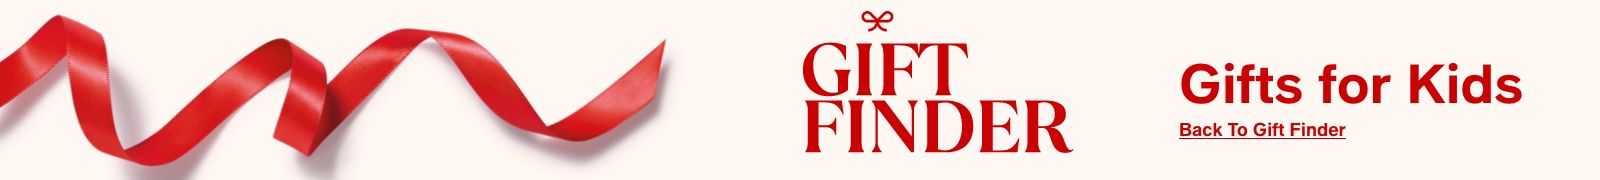 Gift Finder, Gifts for Kids